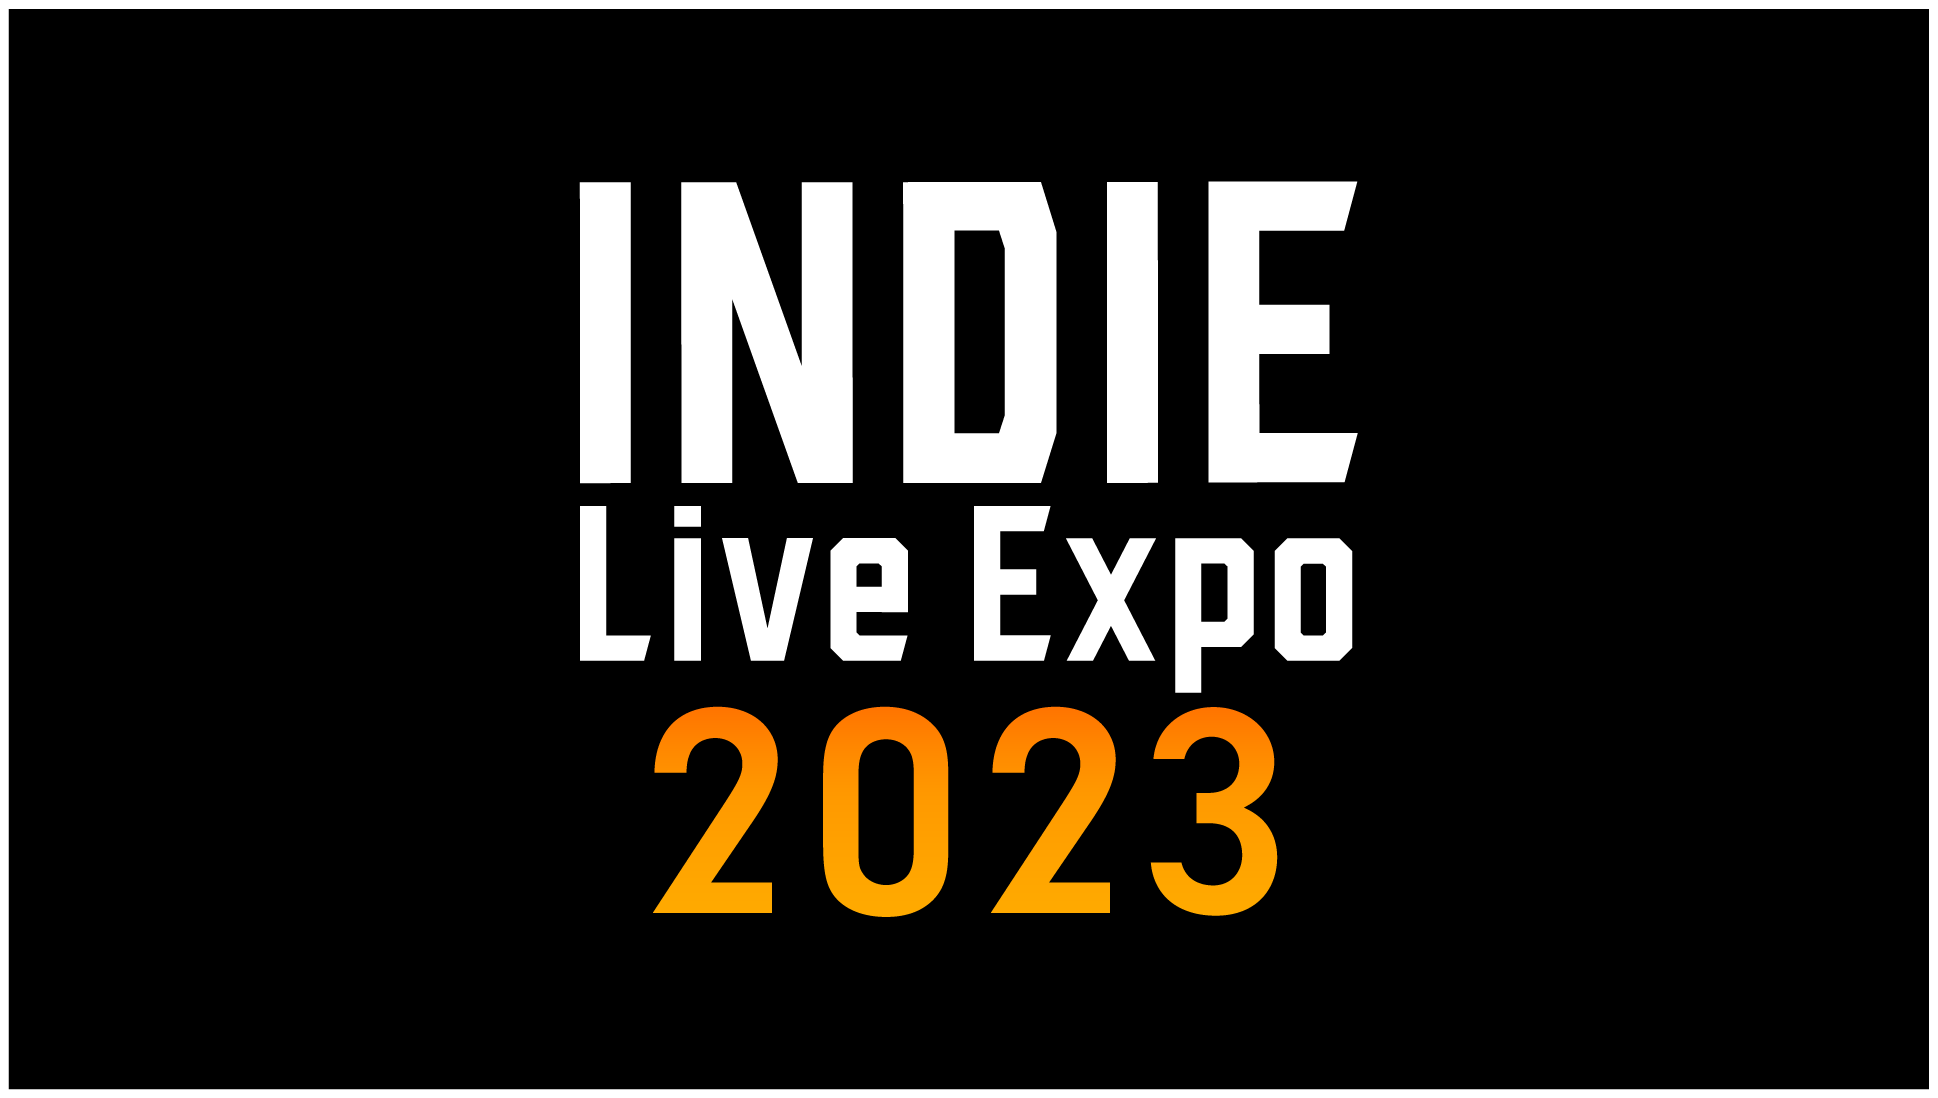 Indie-Live-Expo-2023_logo_RGB_B_base INDIE Live Expo Winter 2022 Reaches 16 Million, Dates Announced for 2023 Summer Showcase